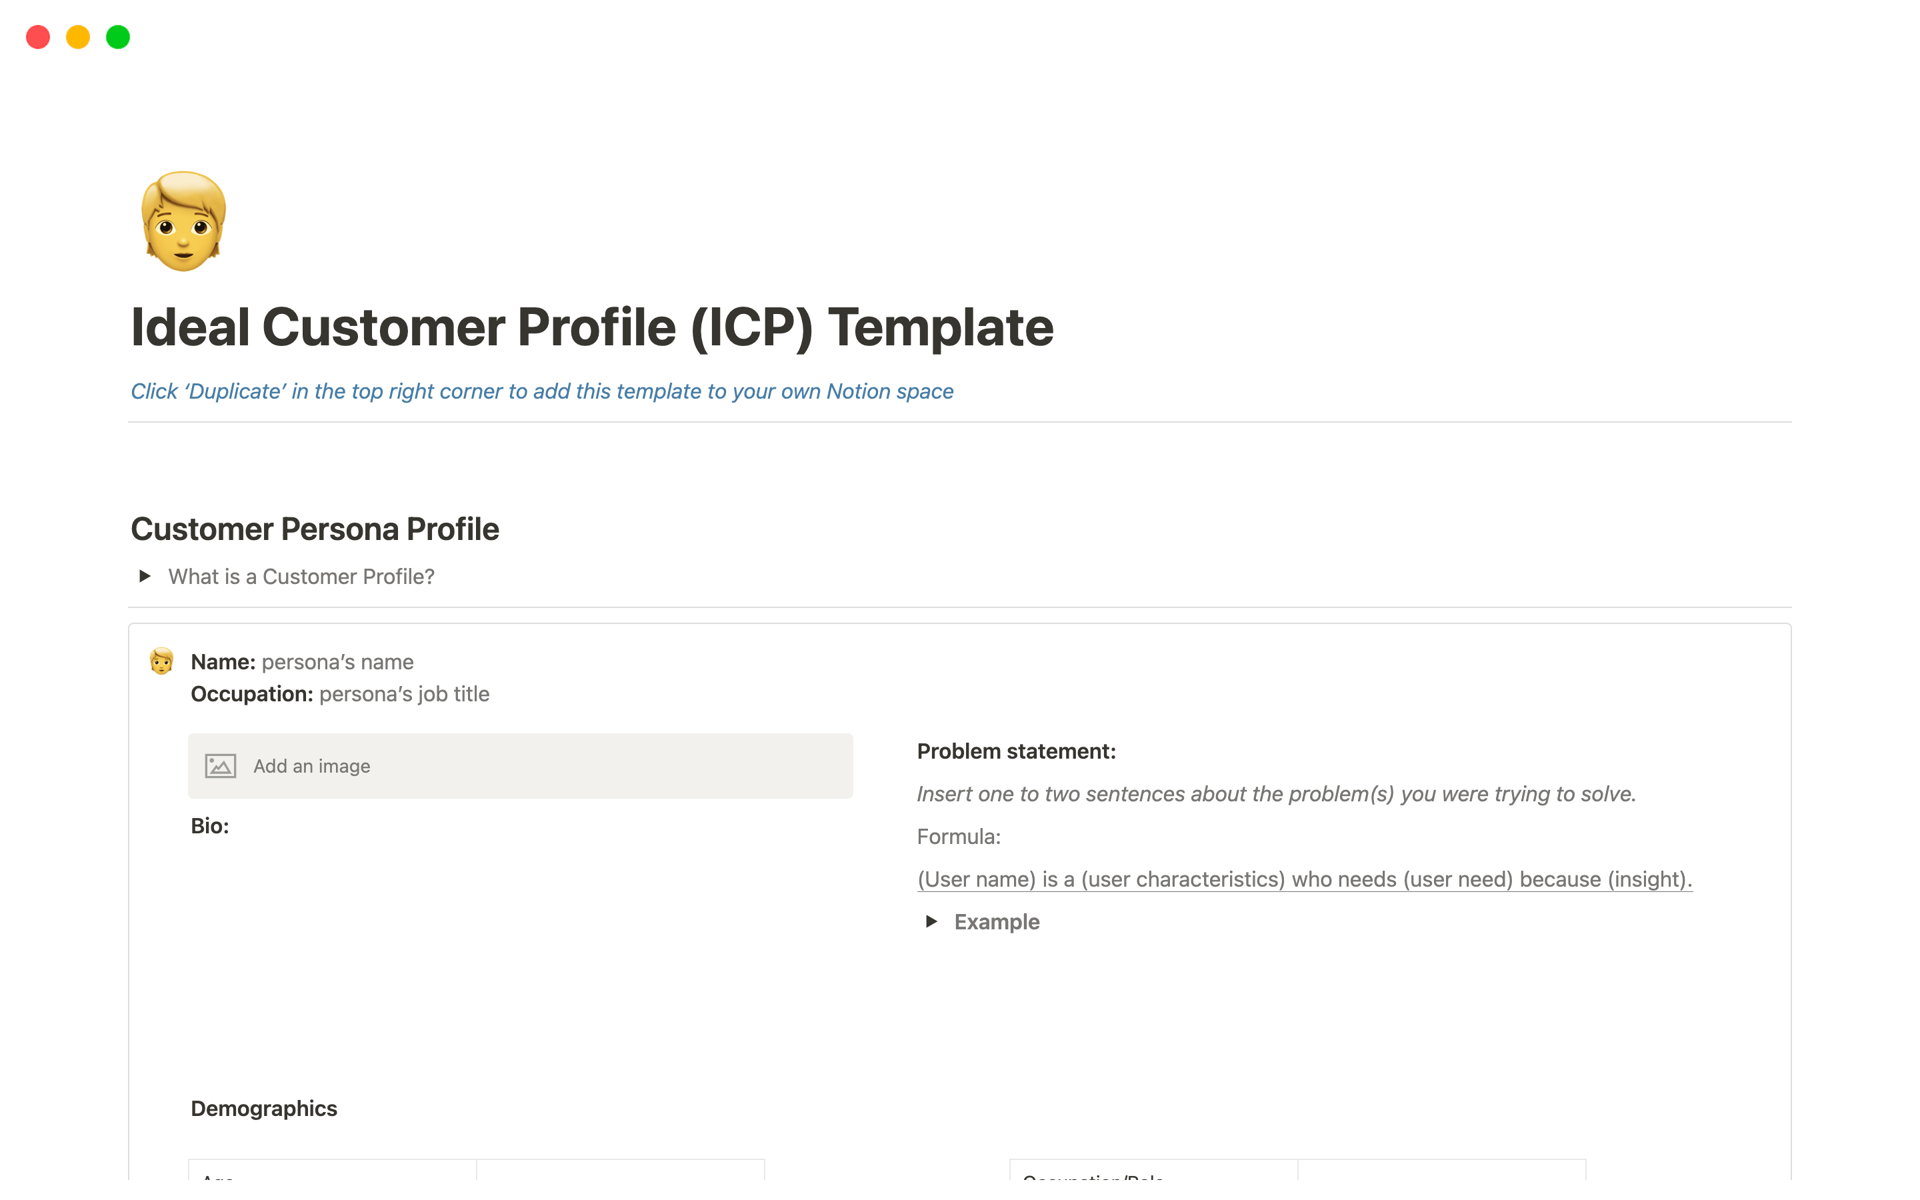 Build your ideal customer profile effortlessly with our free Notion template, designed to assist you in defining your target audience.